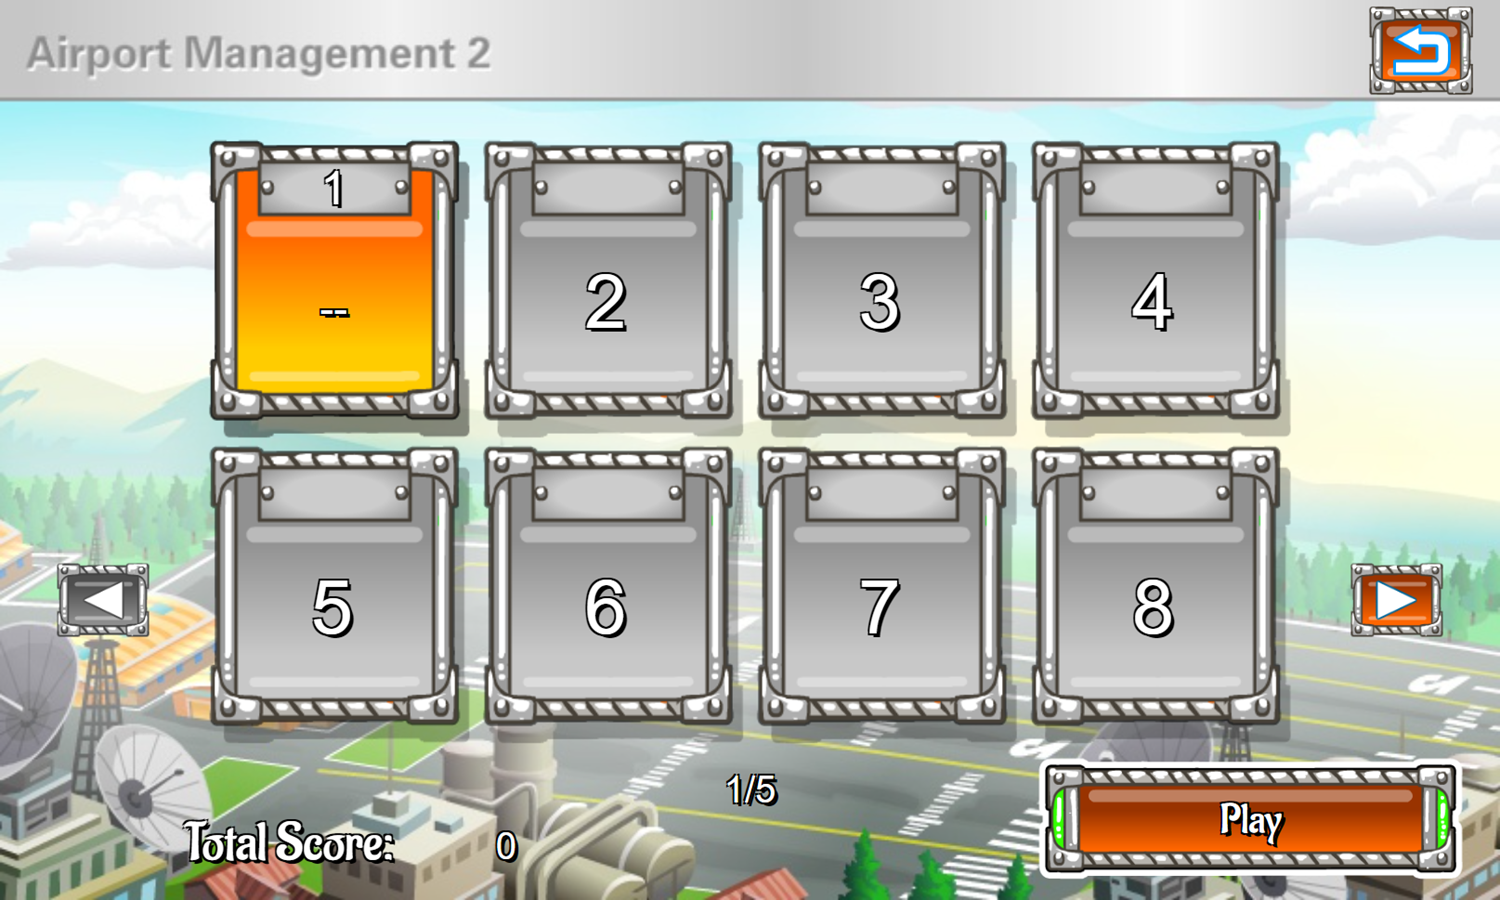 Airport Management 2 Game Stage Select Screenshot.